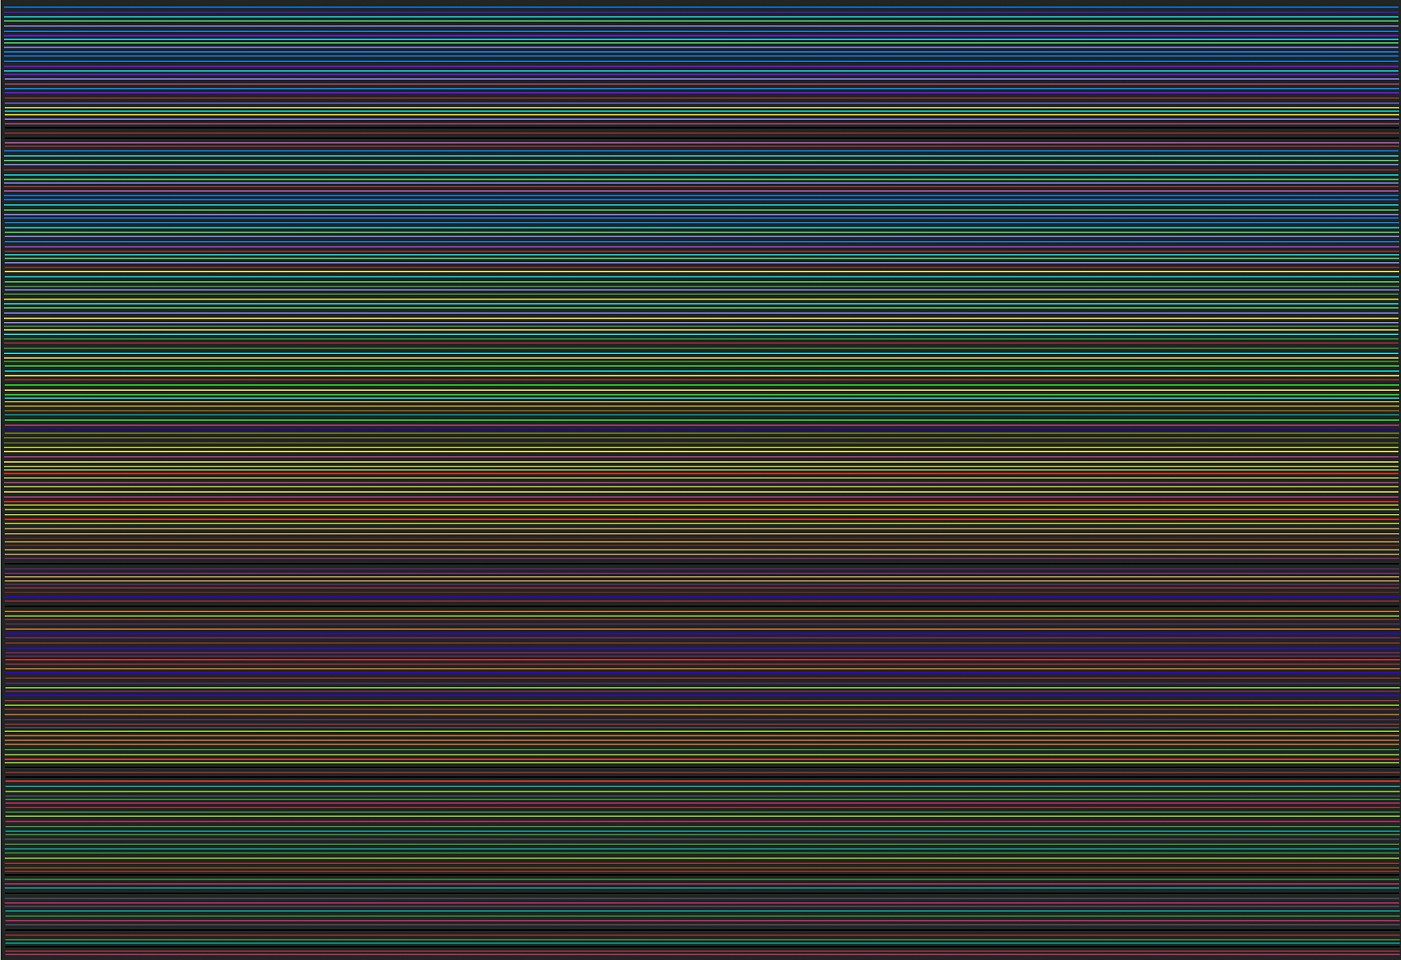 Dane Albert, Color Sticks #13 Night, 2023
Acrylic on canvas (Concept), 48 x 72 in. (121.9 x 182.9 cm)
Series of colored lines and shapes in multiple configurations
DA.2023.sticks-013-night